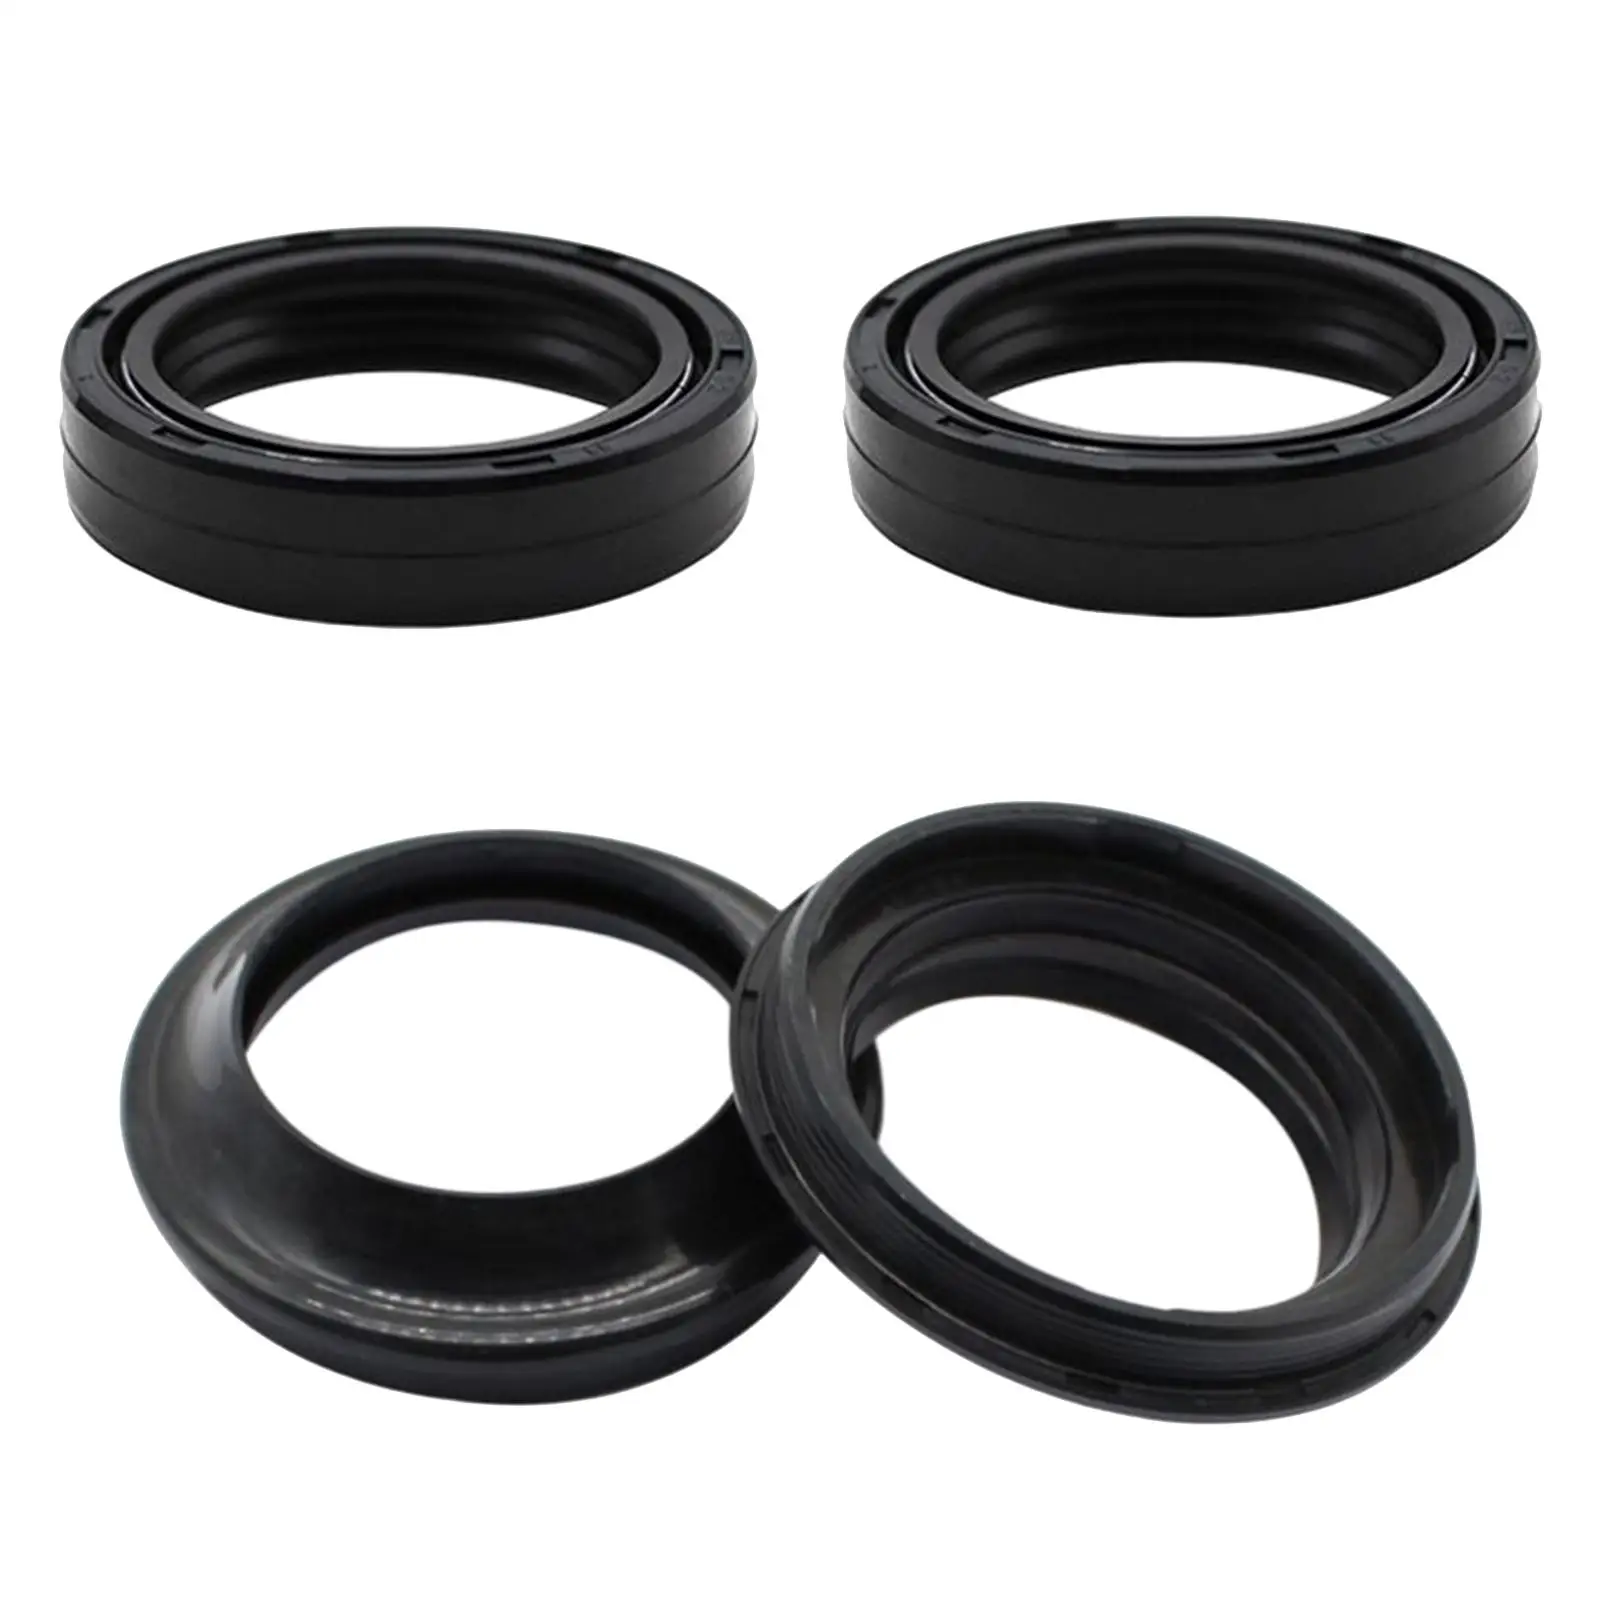 Motorcycle Fork Seal and Dust Seal Kit Rubber 49x60x10mm for Suzuki Rm-Z450 Dr-Z400SM RM250 Dr-Z400 Dr-Z400E